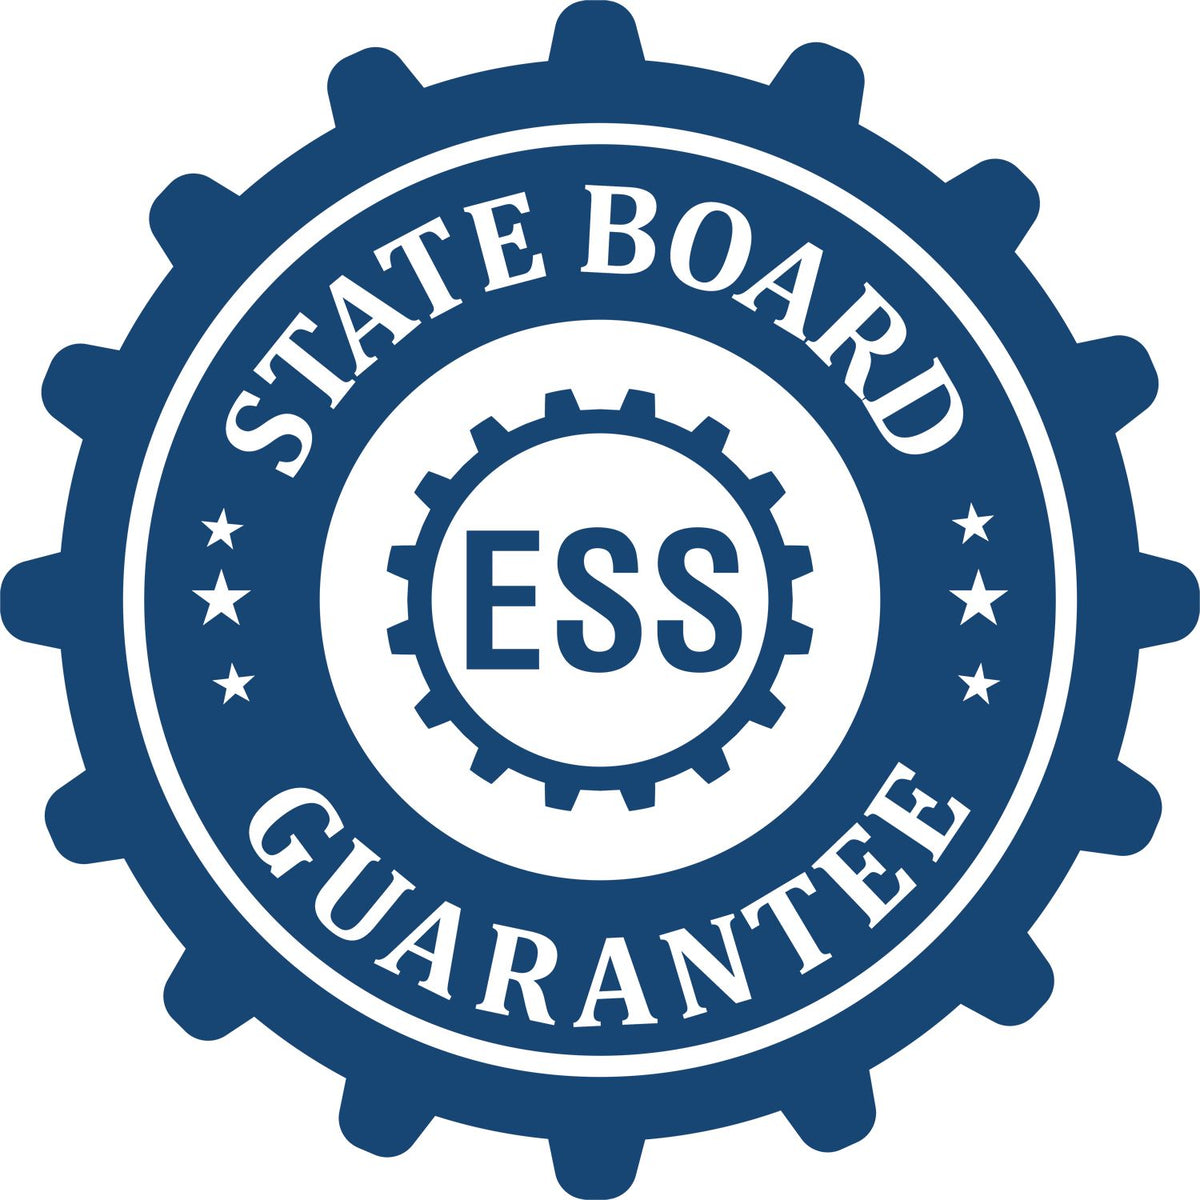 An emblem in a gear shape illustrating a state board guarantee for the North Carolina Professional Engineer Seal Stamp product.